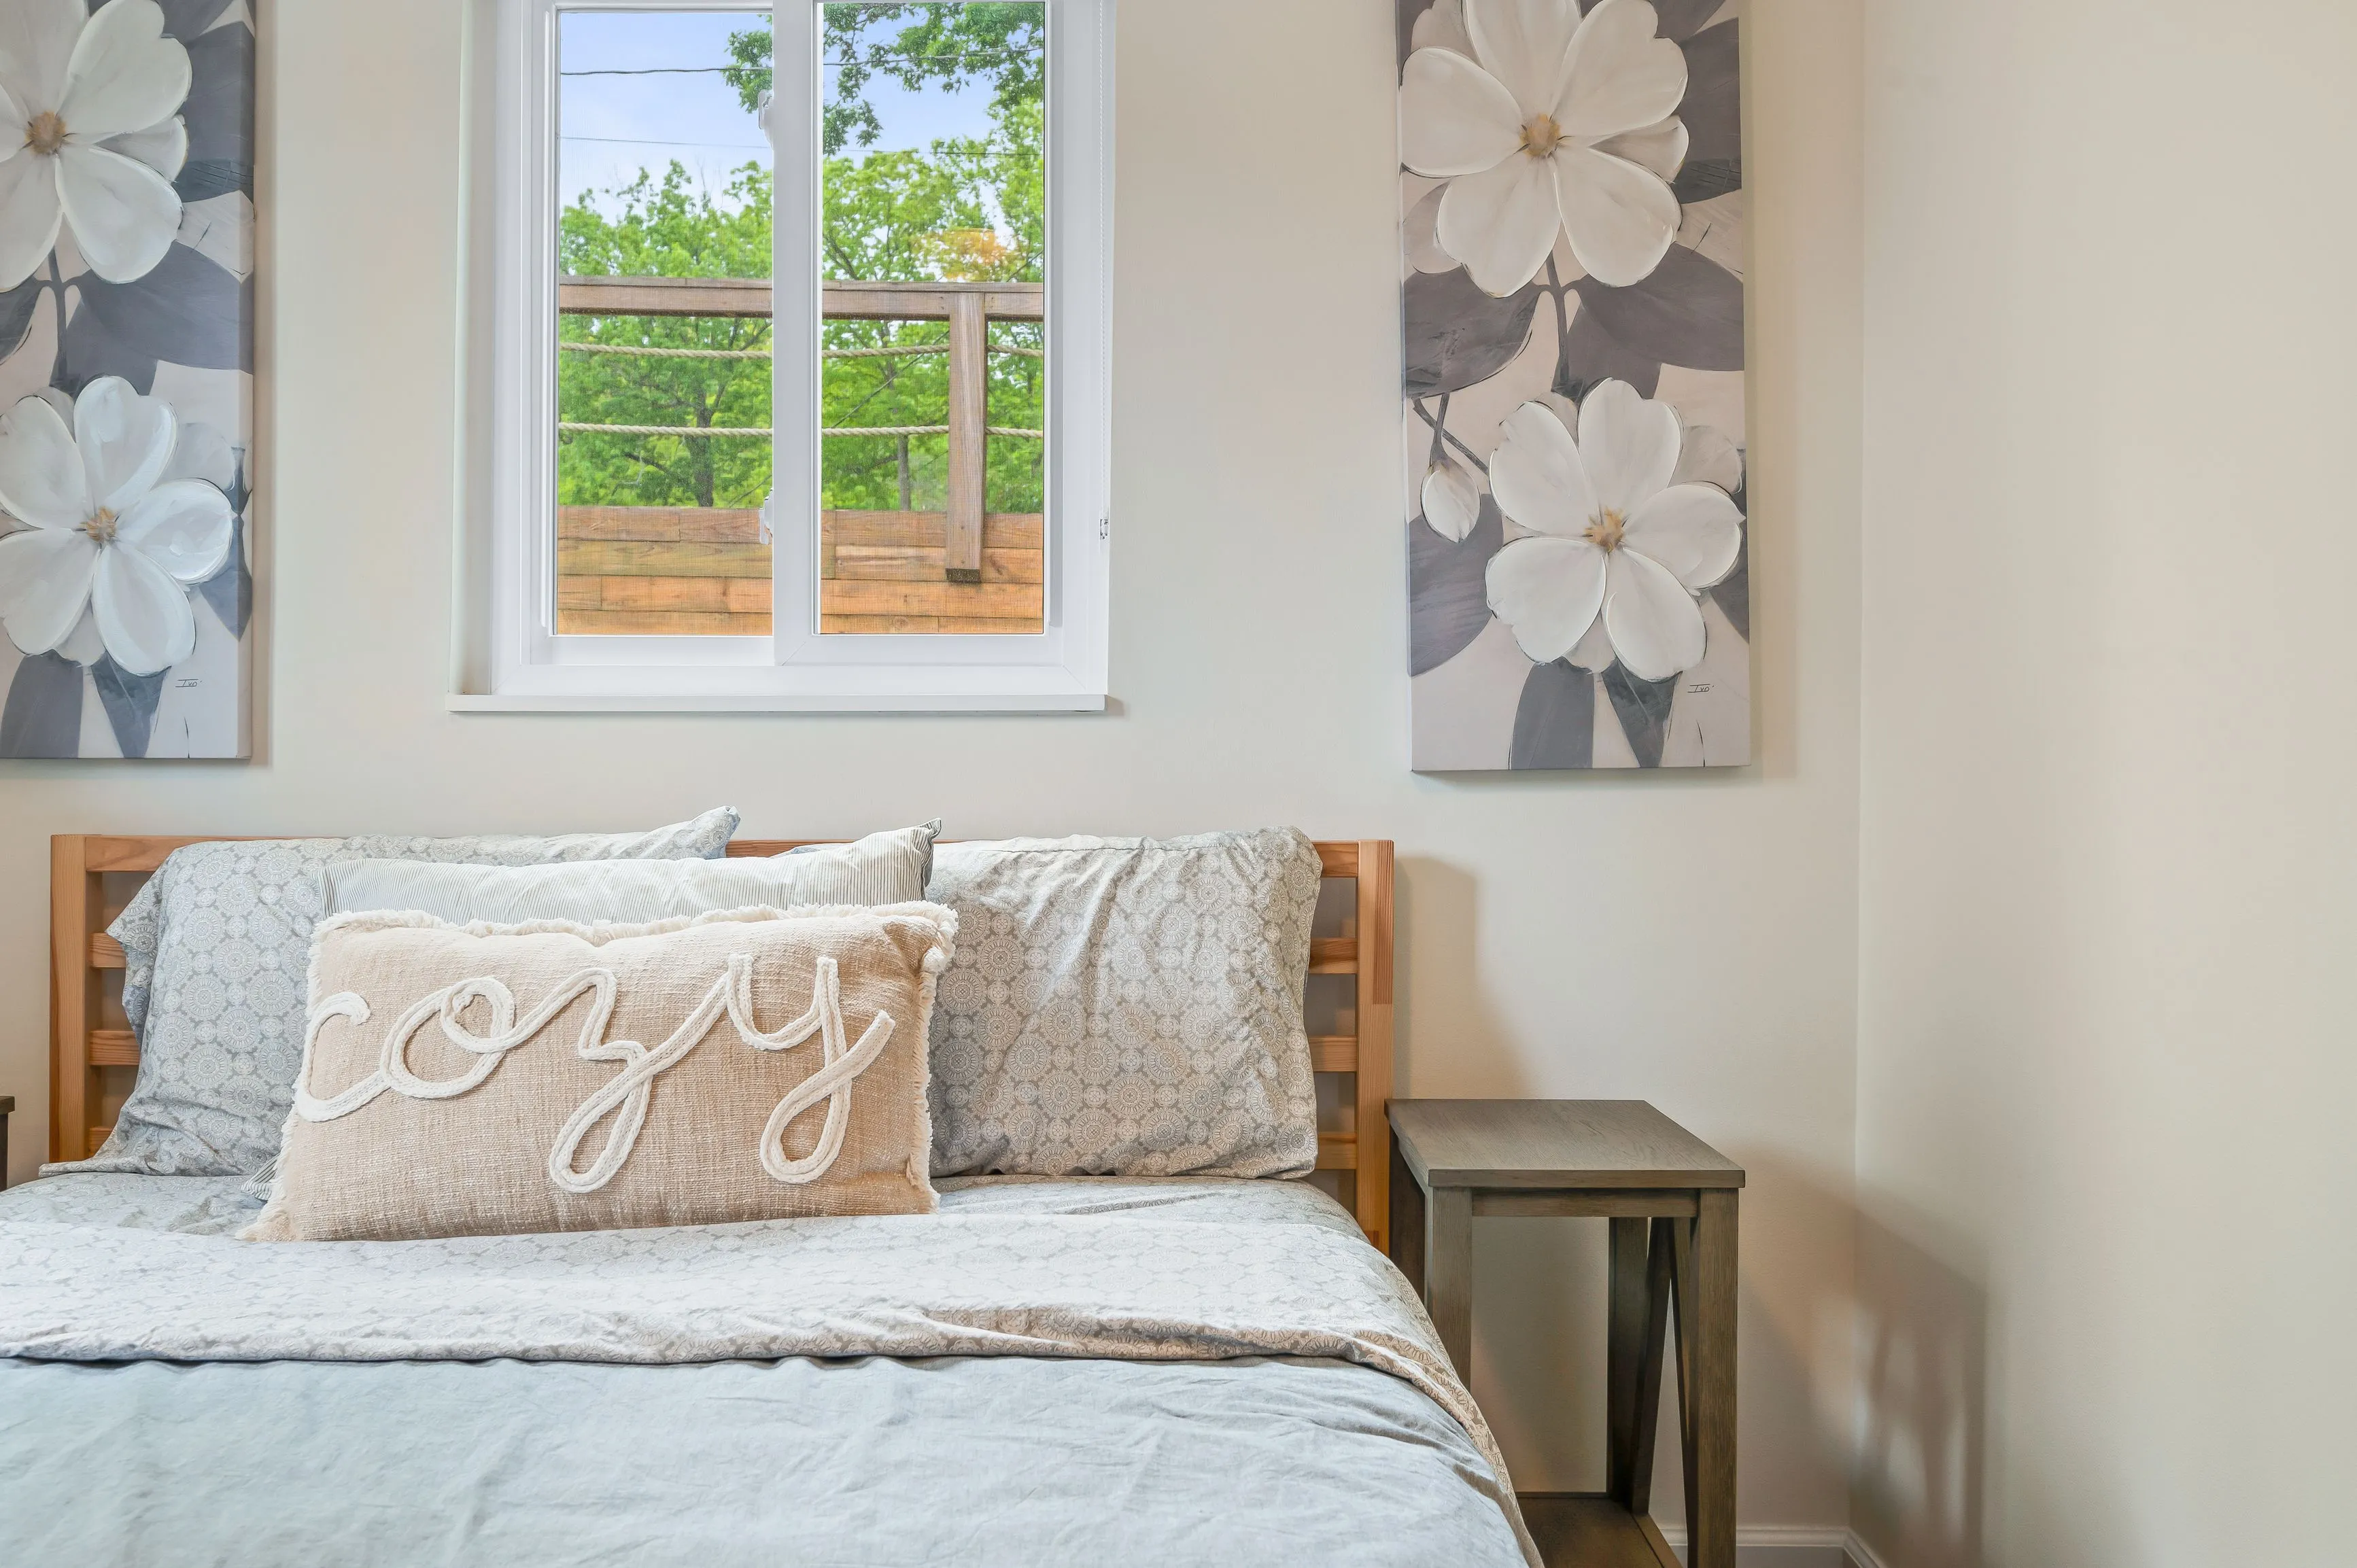 Cozy bedroom interior with a bed covered in soft linens, decorative pillows, and a floral artwork on the wall next to a window with a garden view.